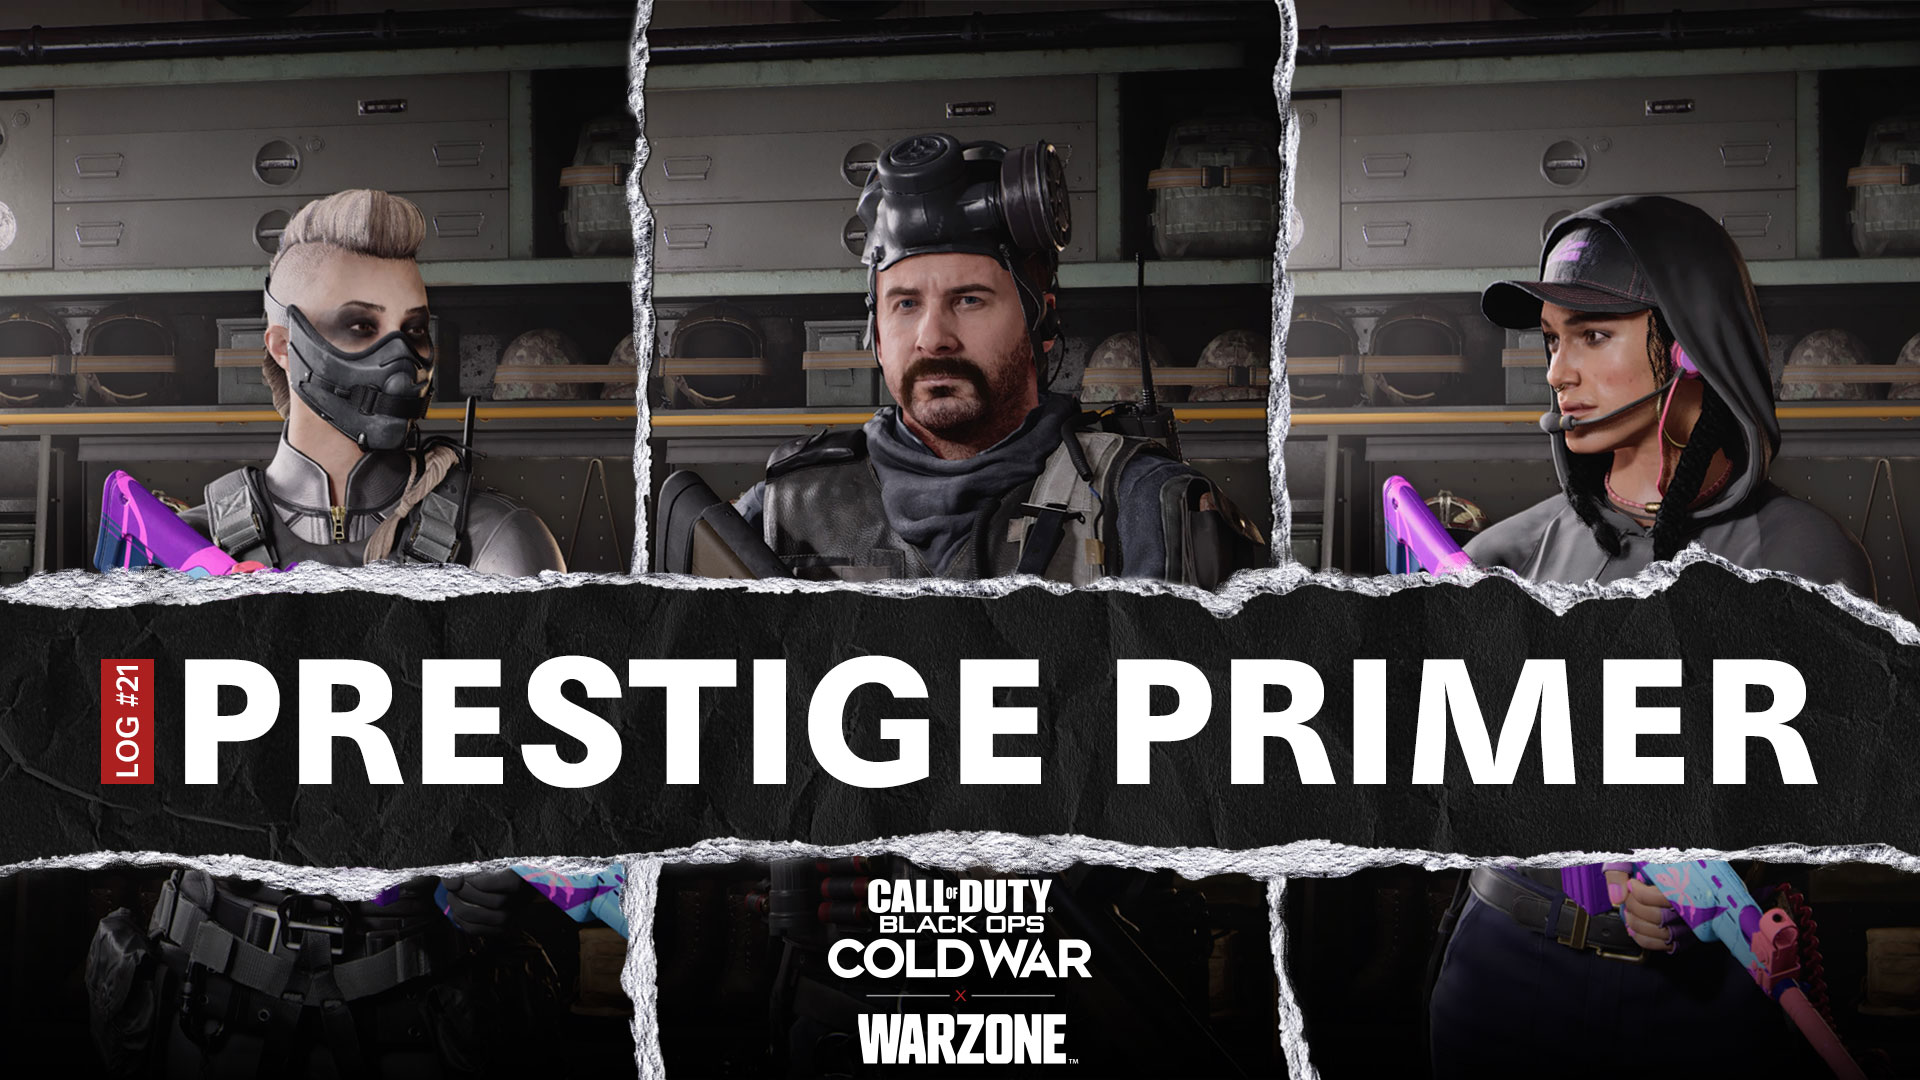 Need More Tips? Check Out the Prestige Primer